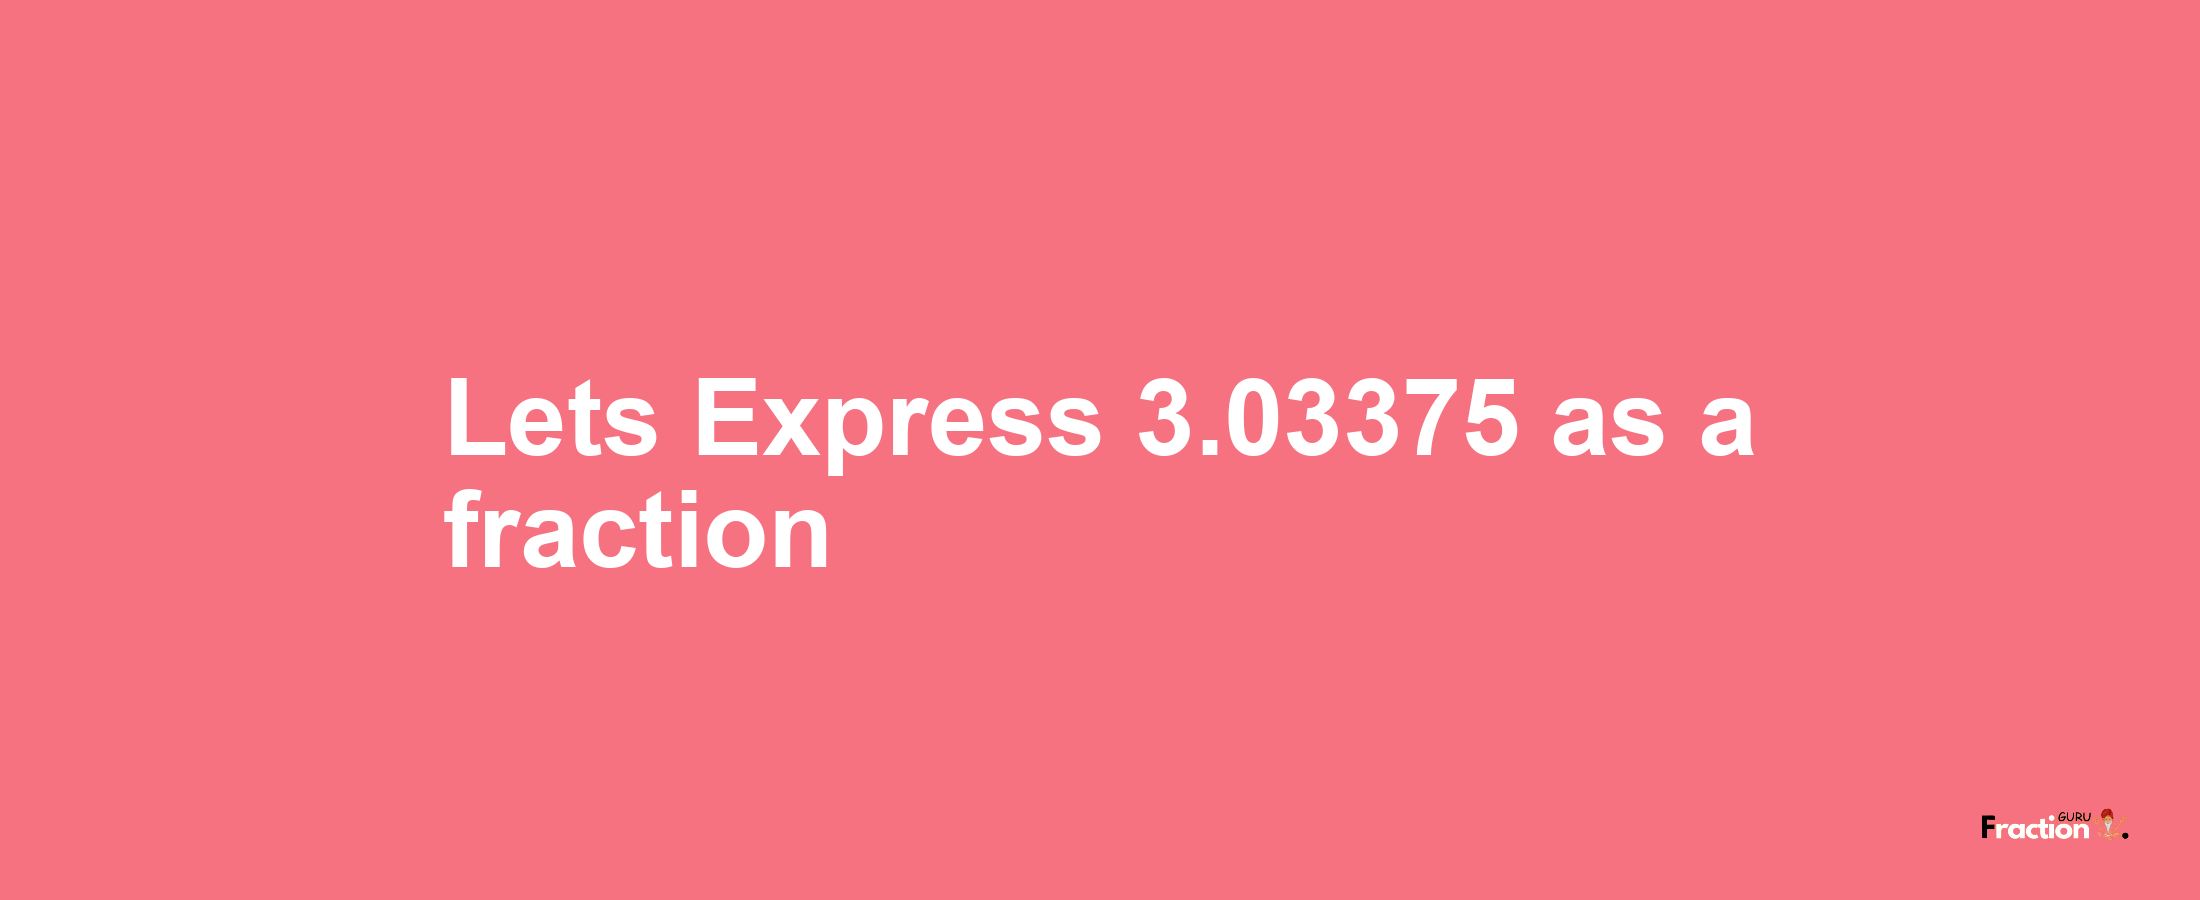 Lets Express 3.03375 as afraction